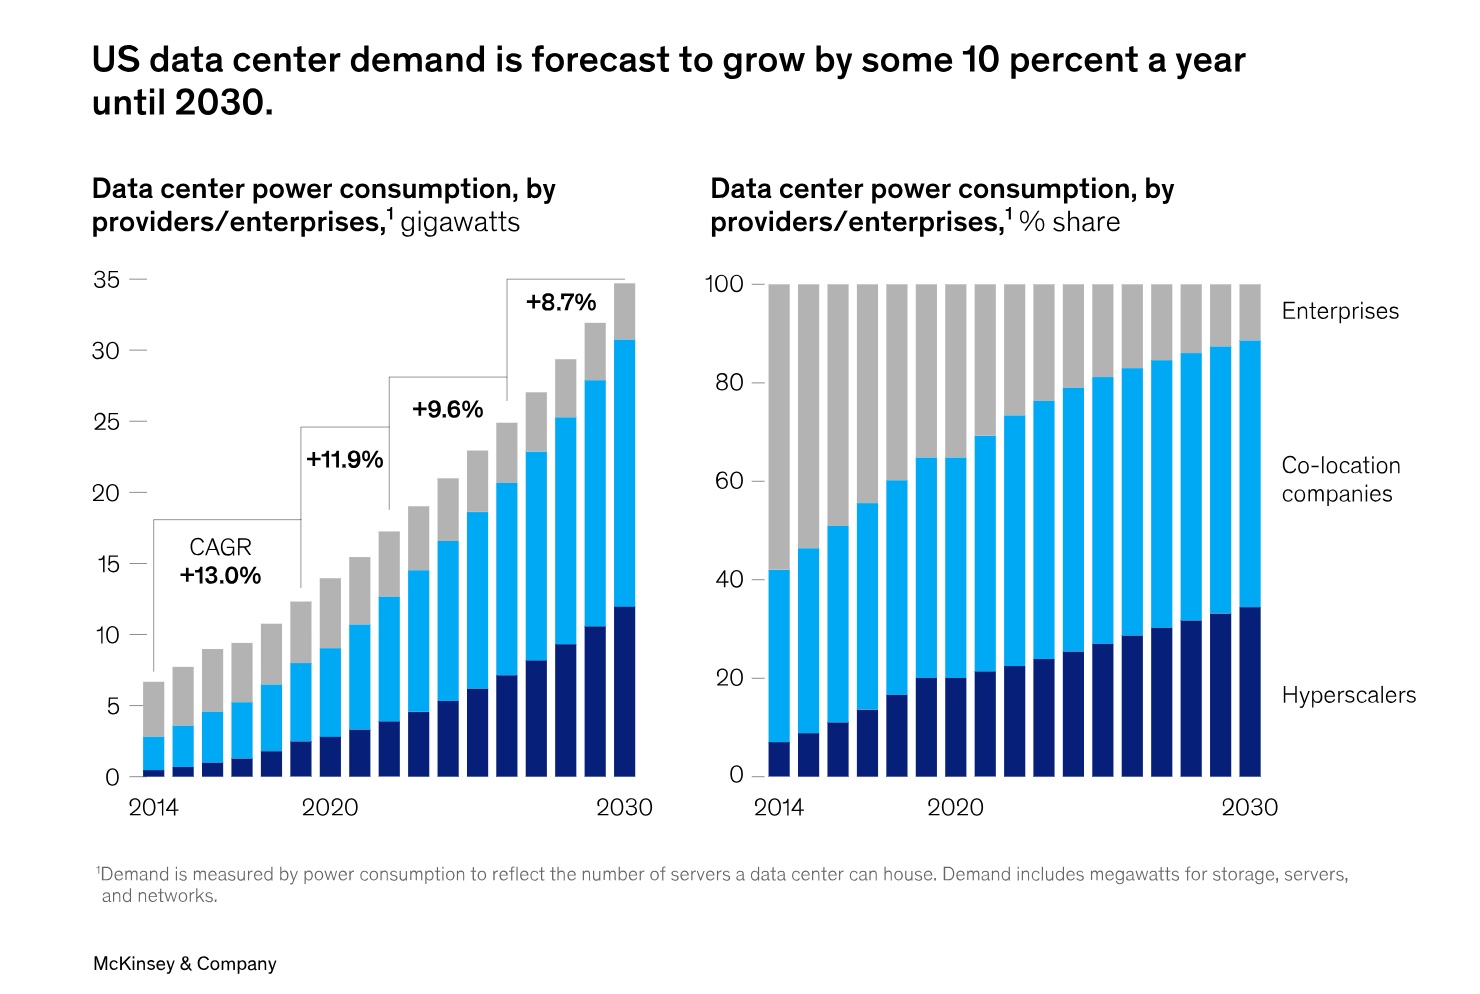 US data center demand is forecast to grow some 10 percent a year until 2030